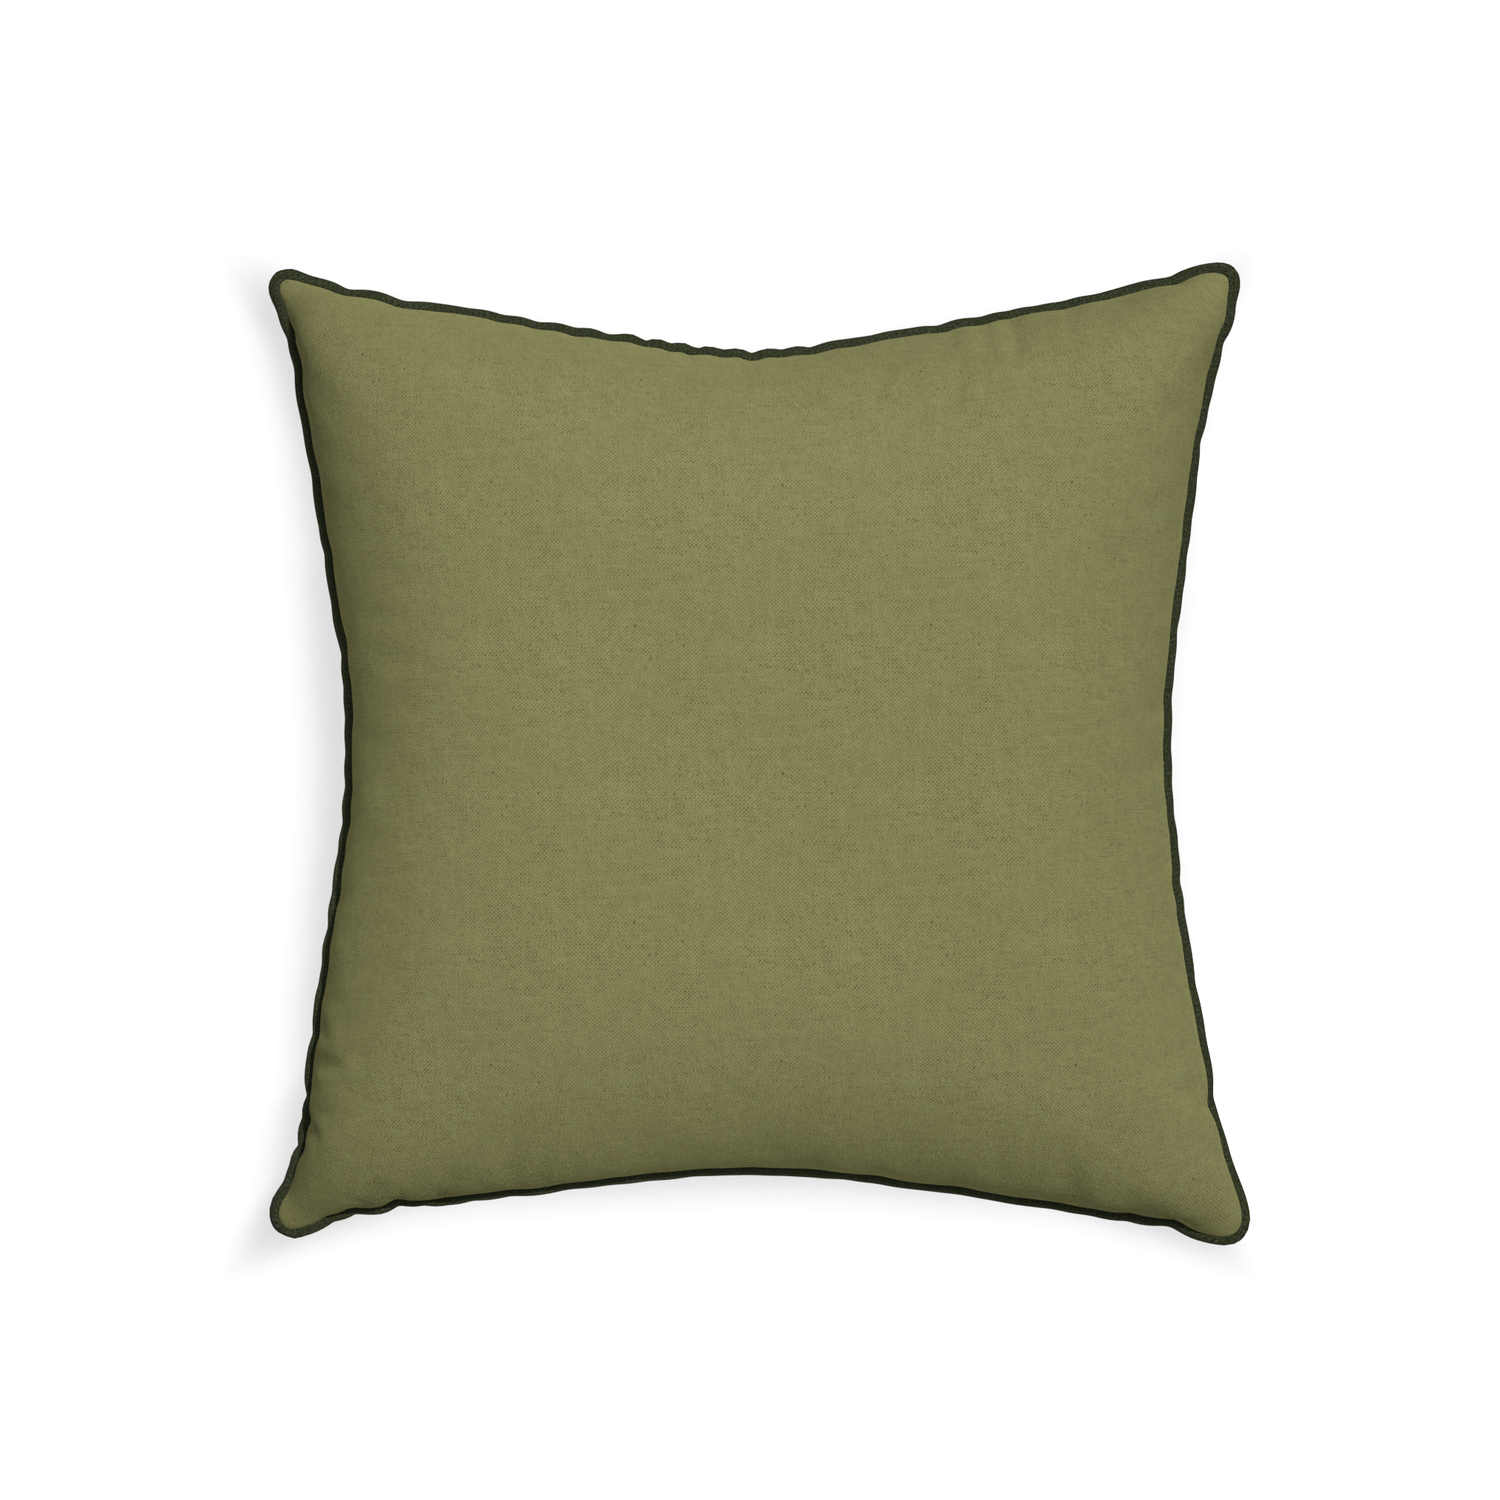 22-square moss custom moss greenpillow with f piping on white background